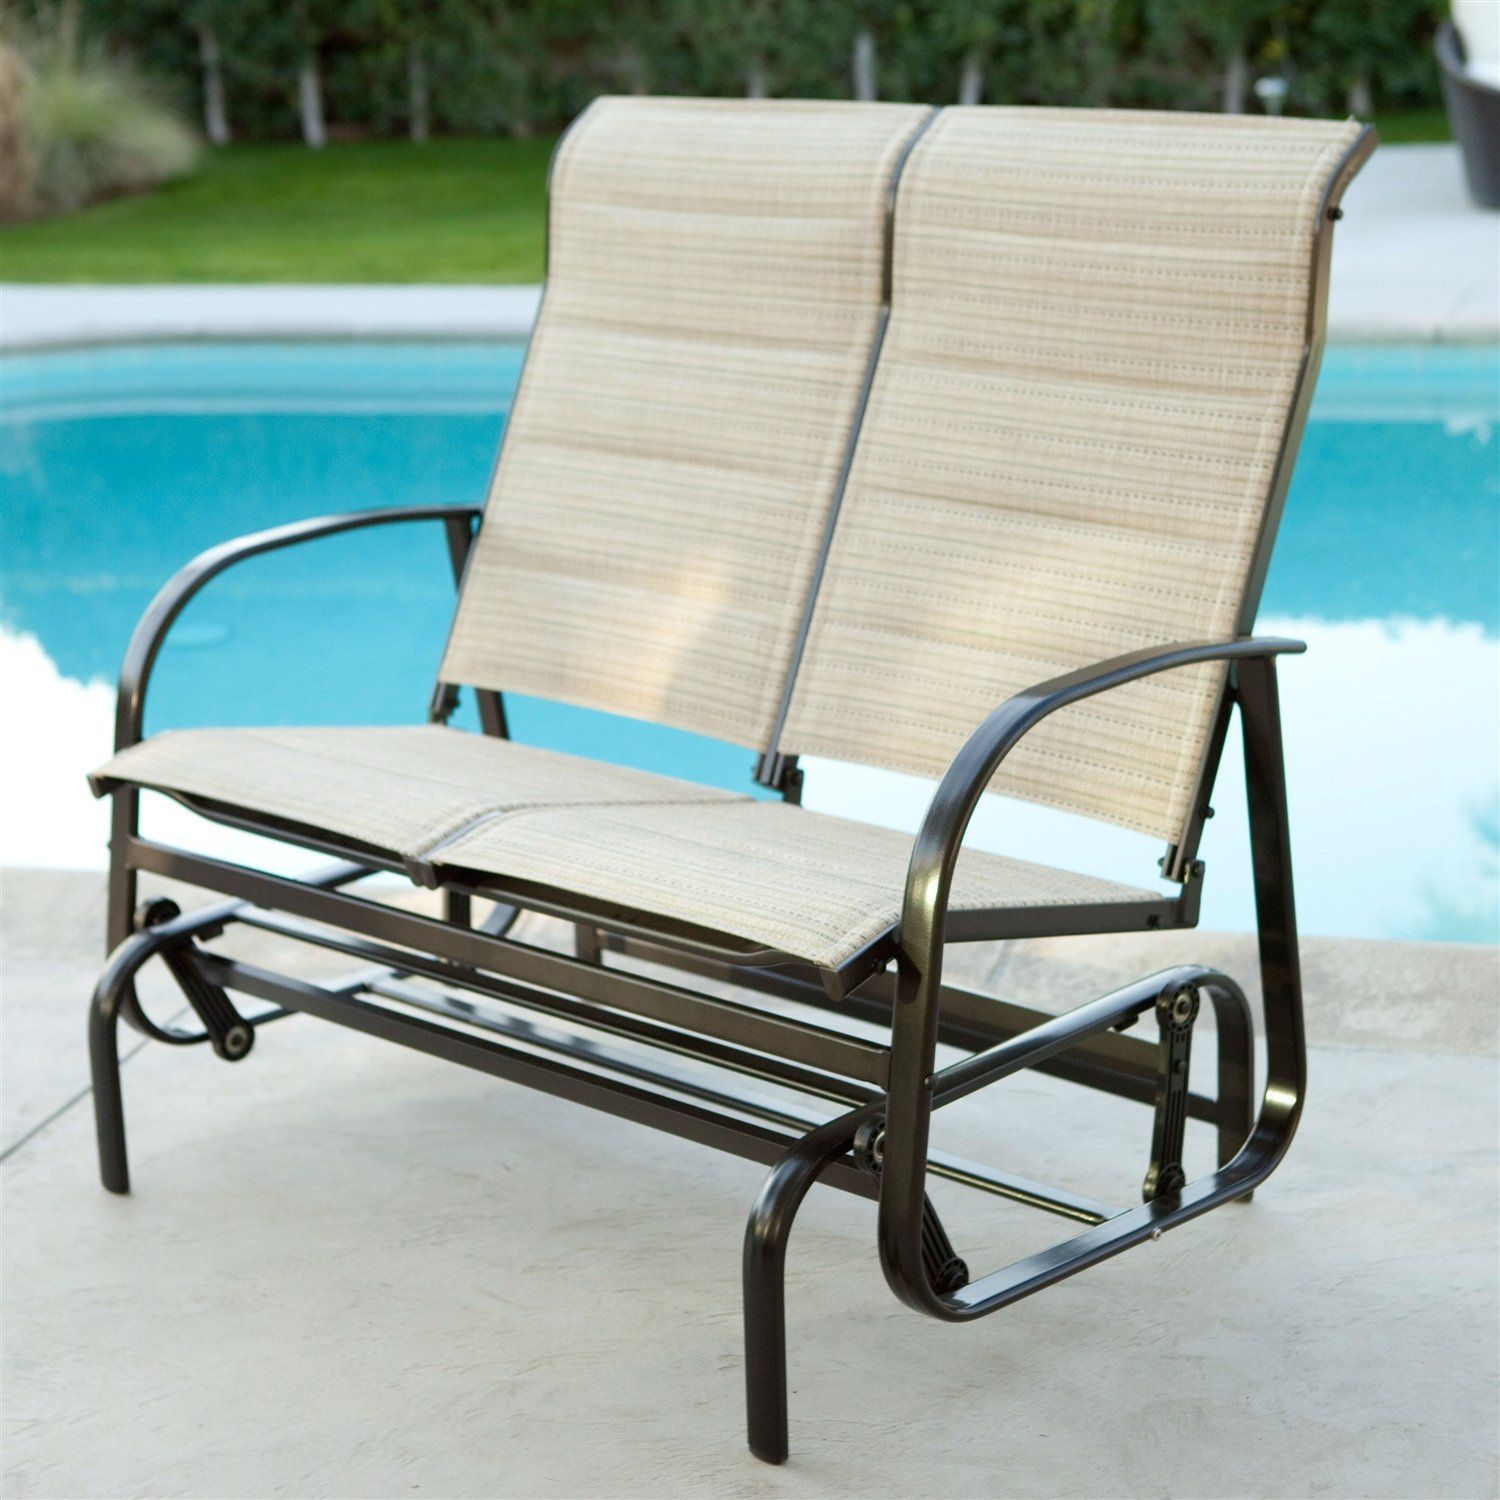 Outdoor Glider Patio Chair Loveseat With Padded Sling Seats Throughout Padded Sling Loveseats With Cushions (View 17 of 25)